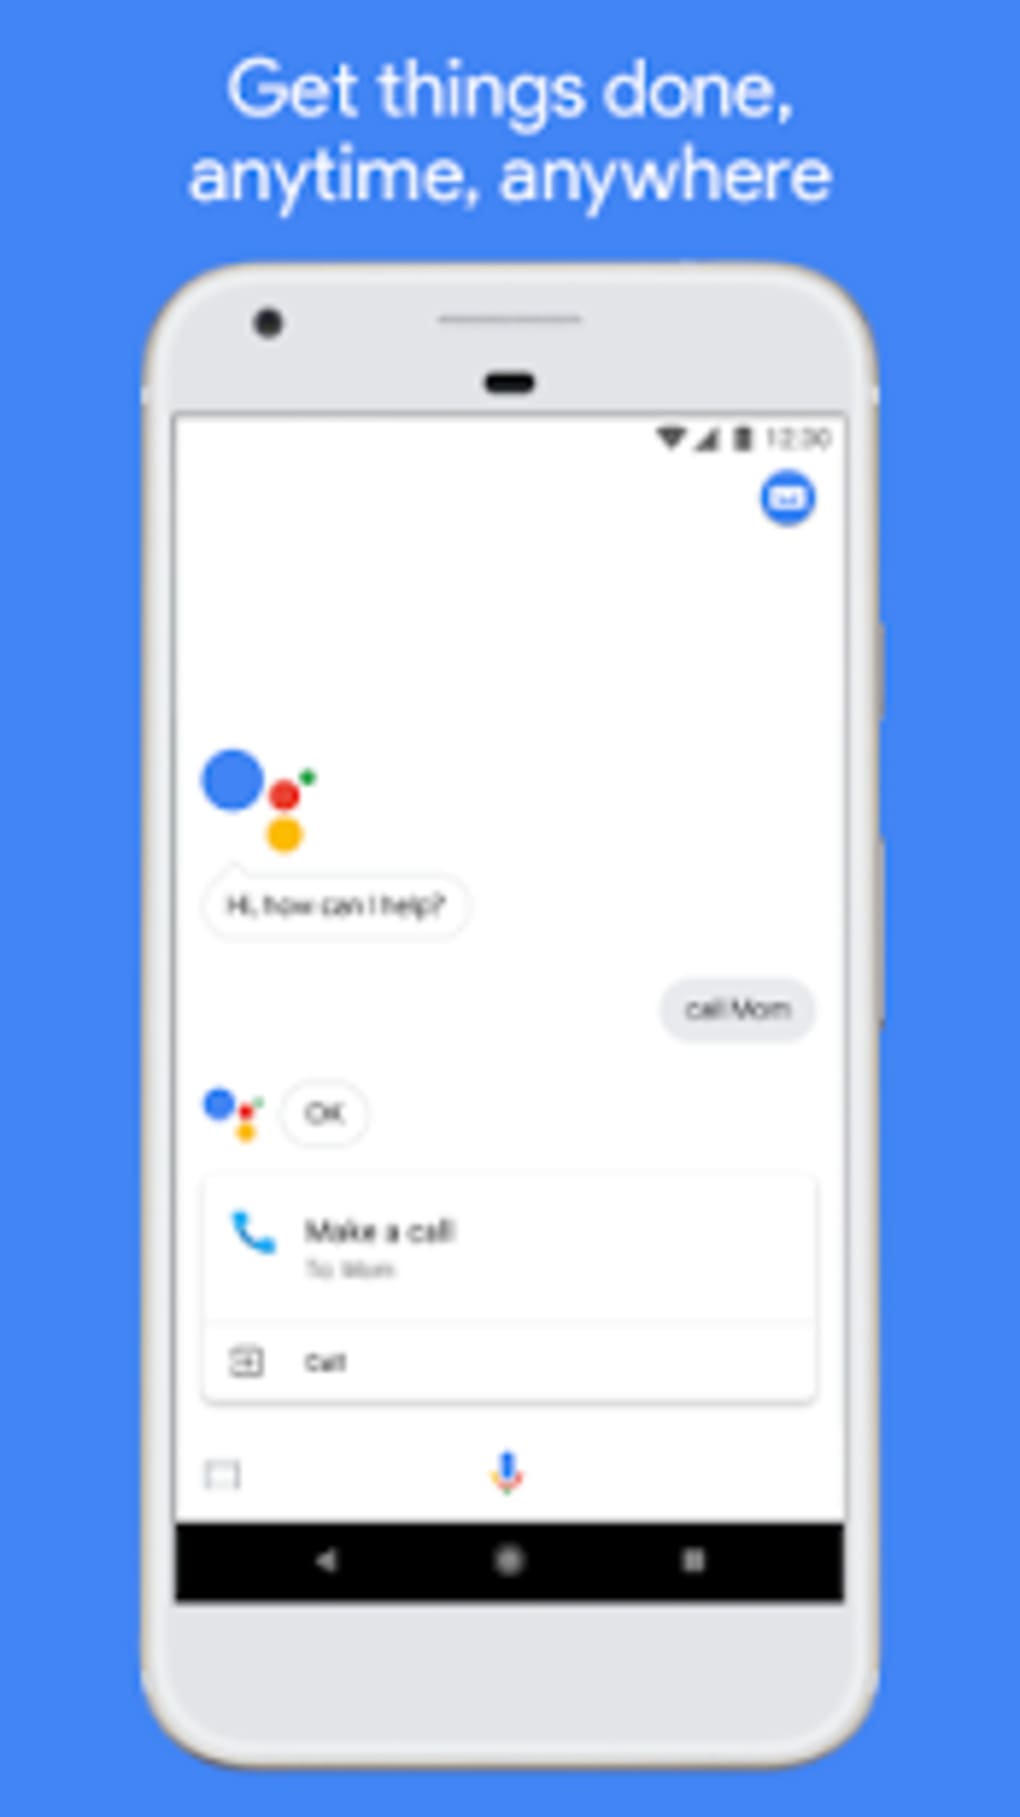 Android voice assistant app